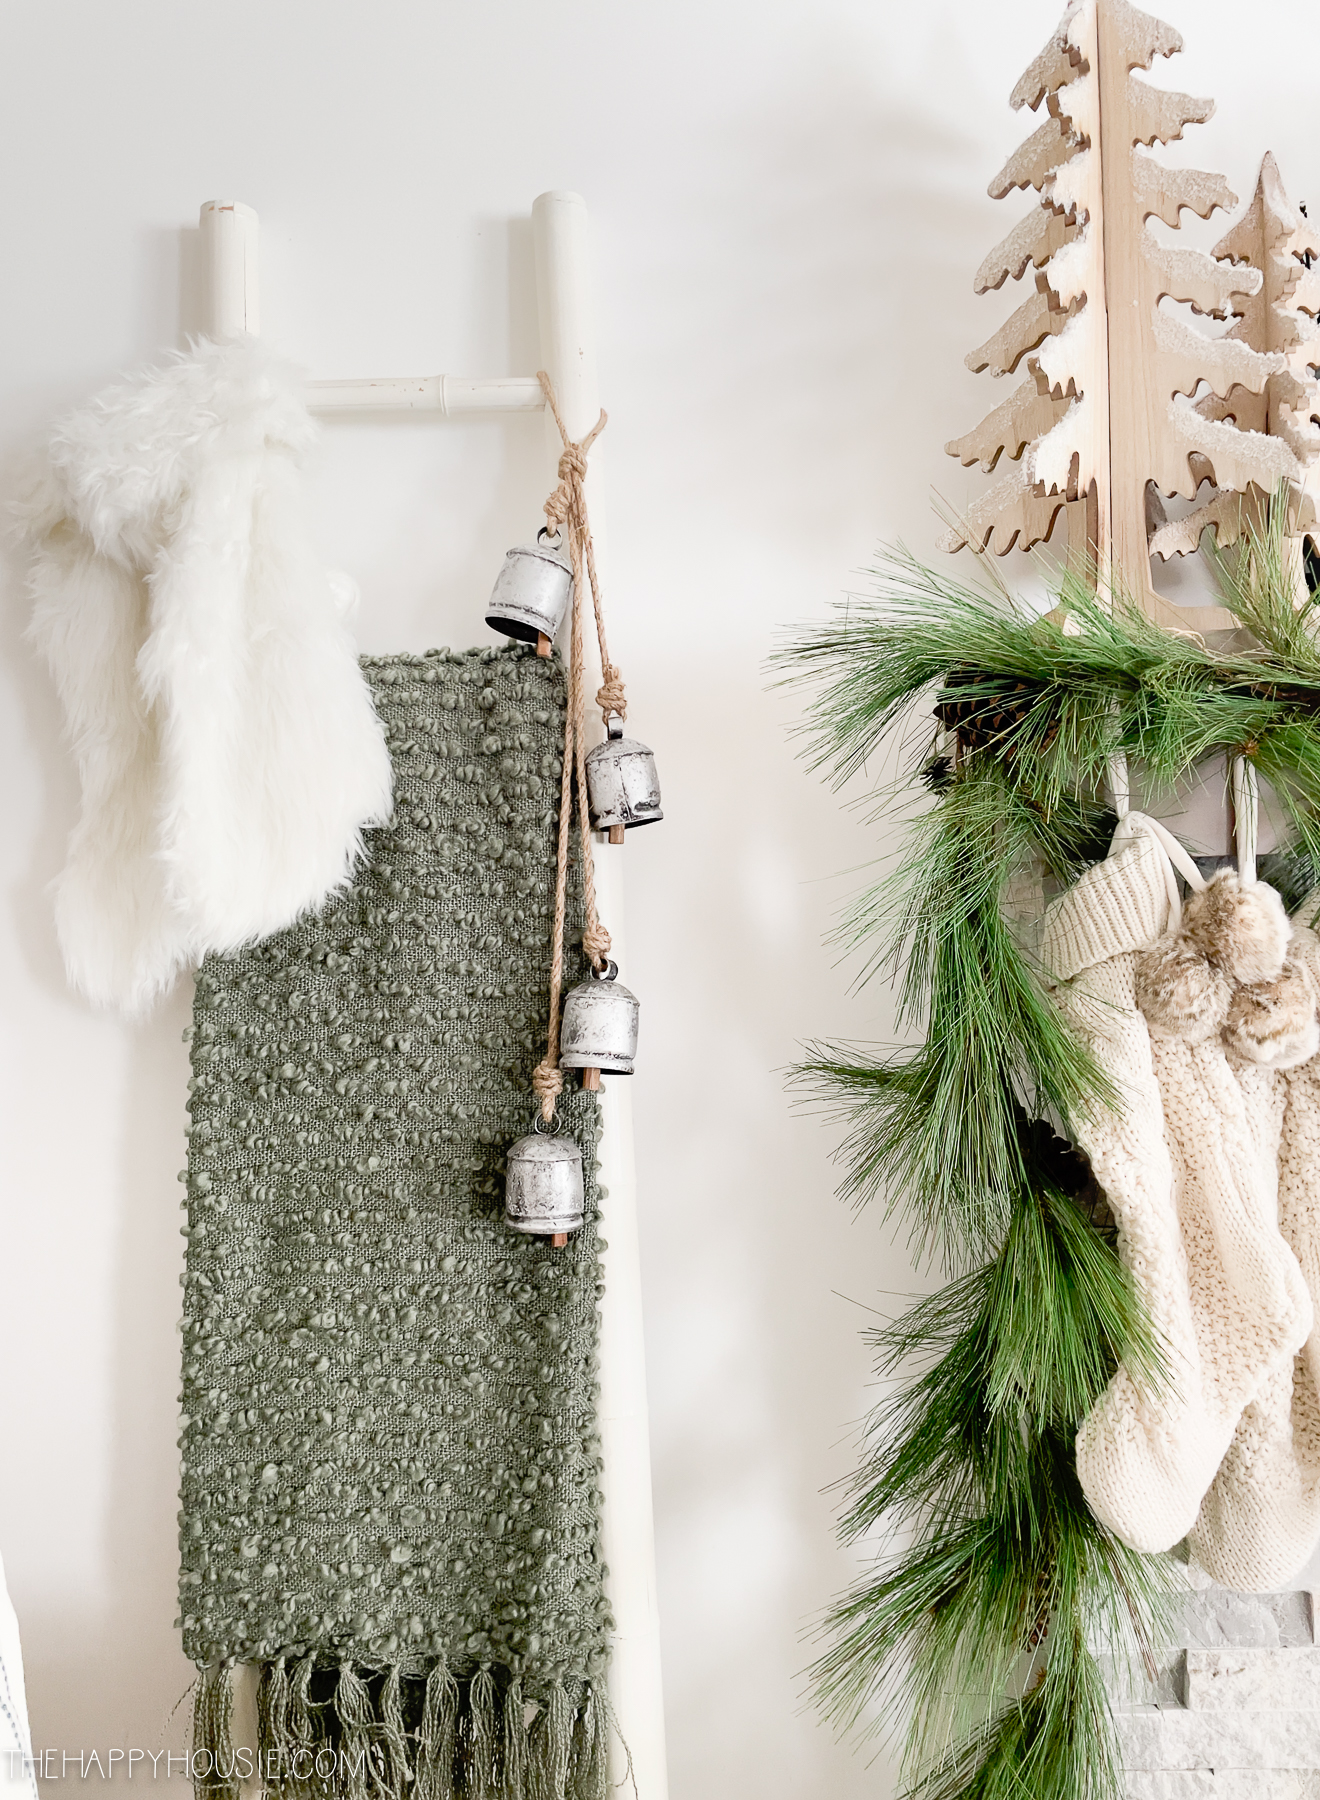 A blanket ladder with a green blanket on it and bells.